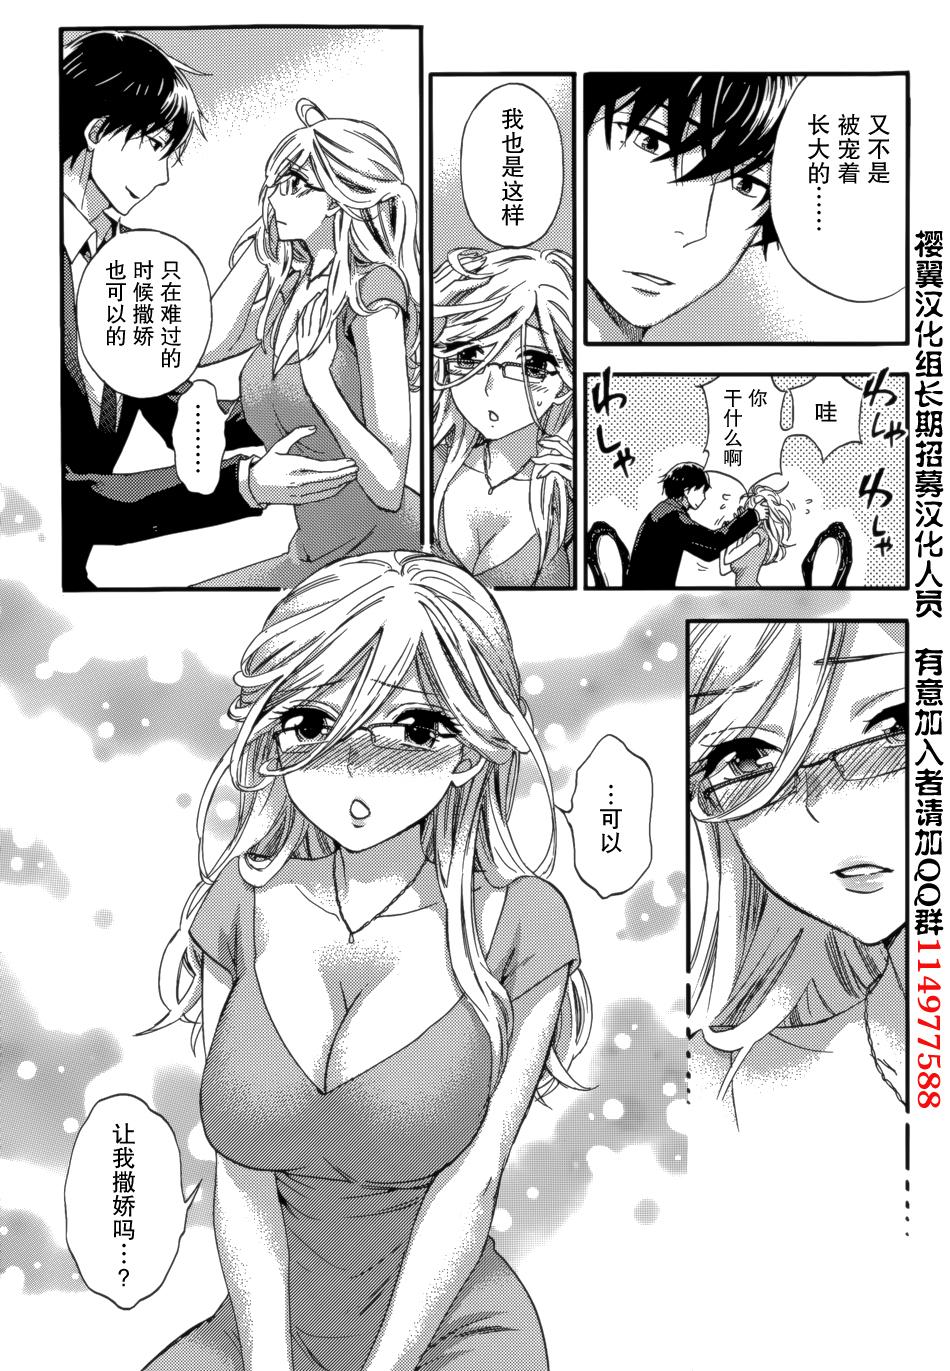 Anal Gape HUNDRED GAME Ch. 7 Free Fucking - Page 7